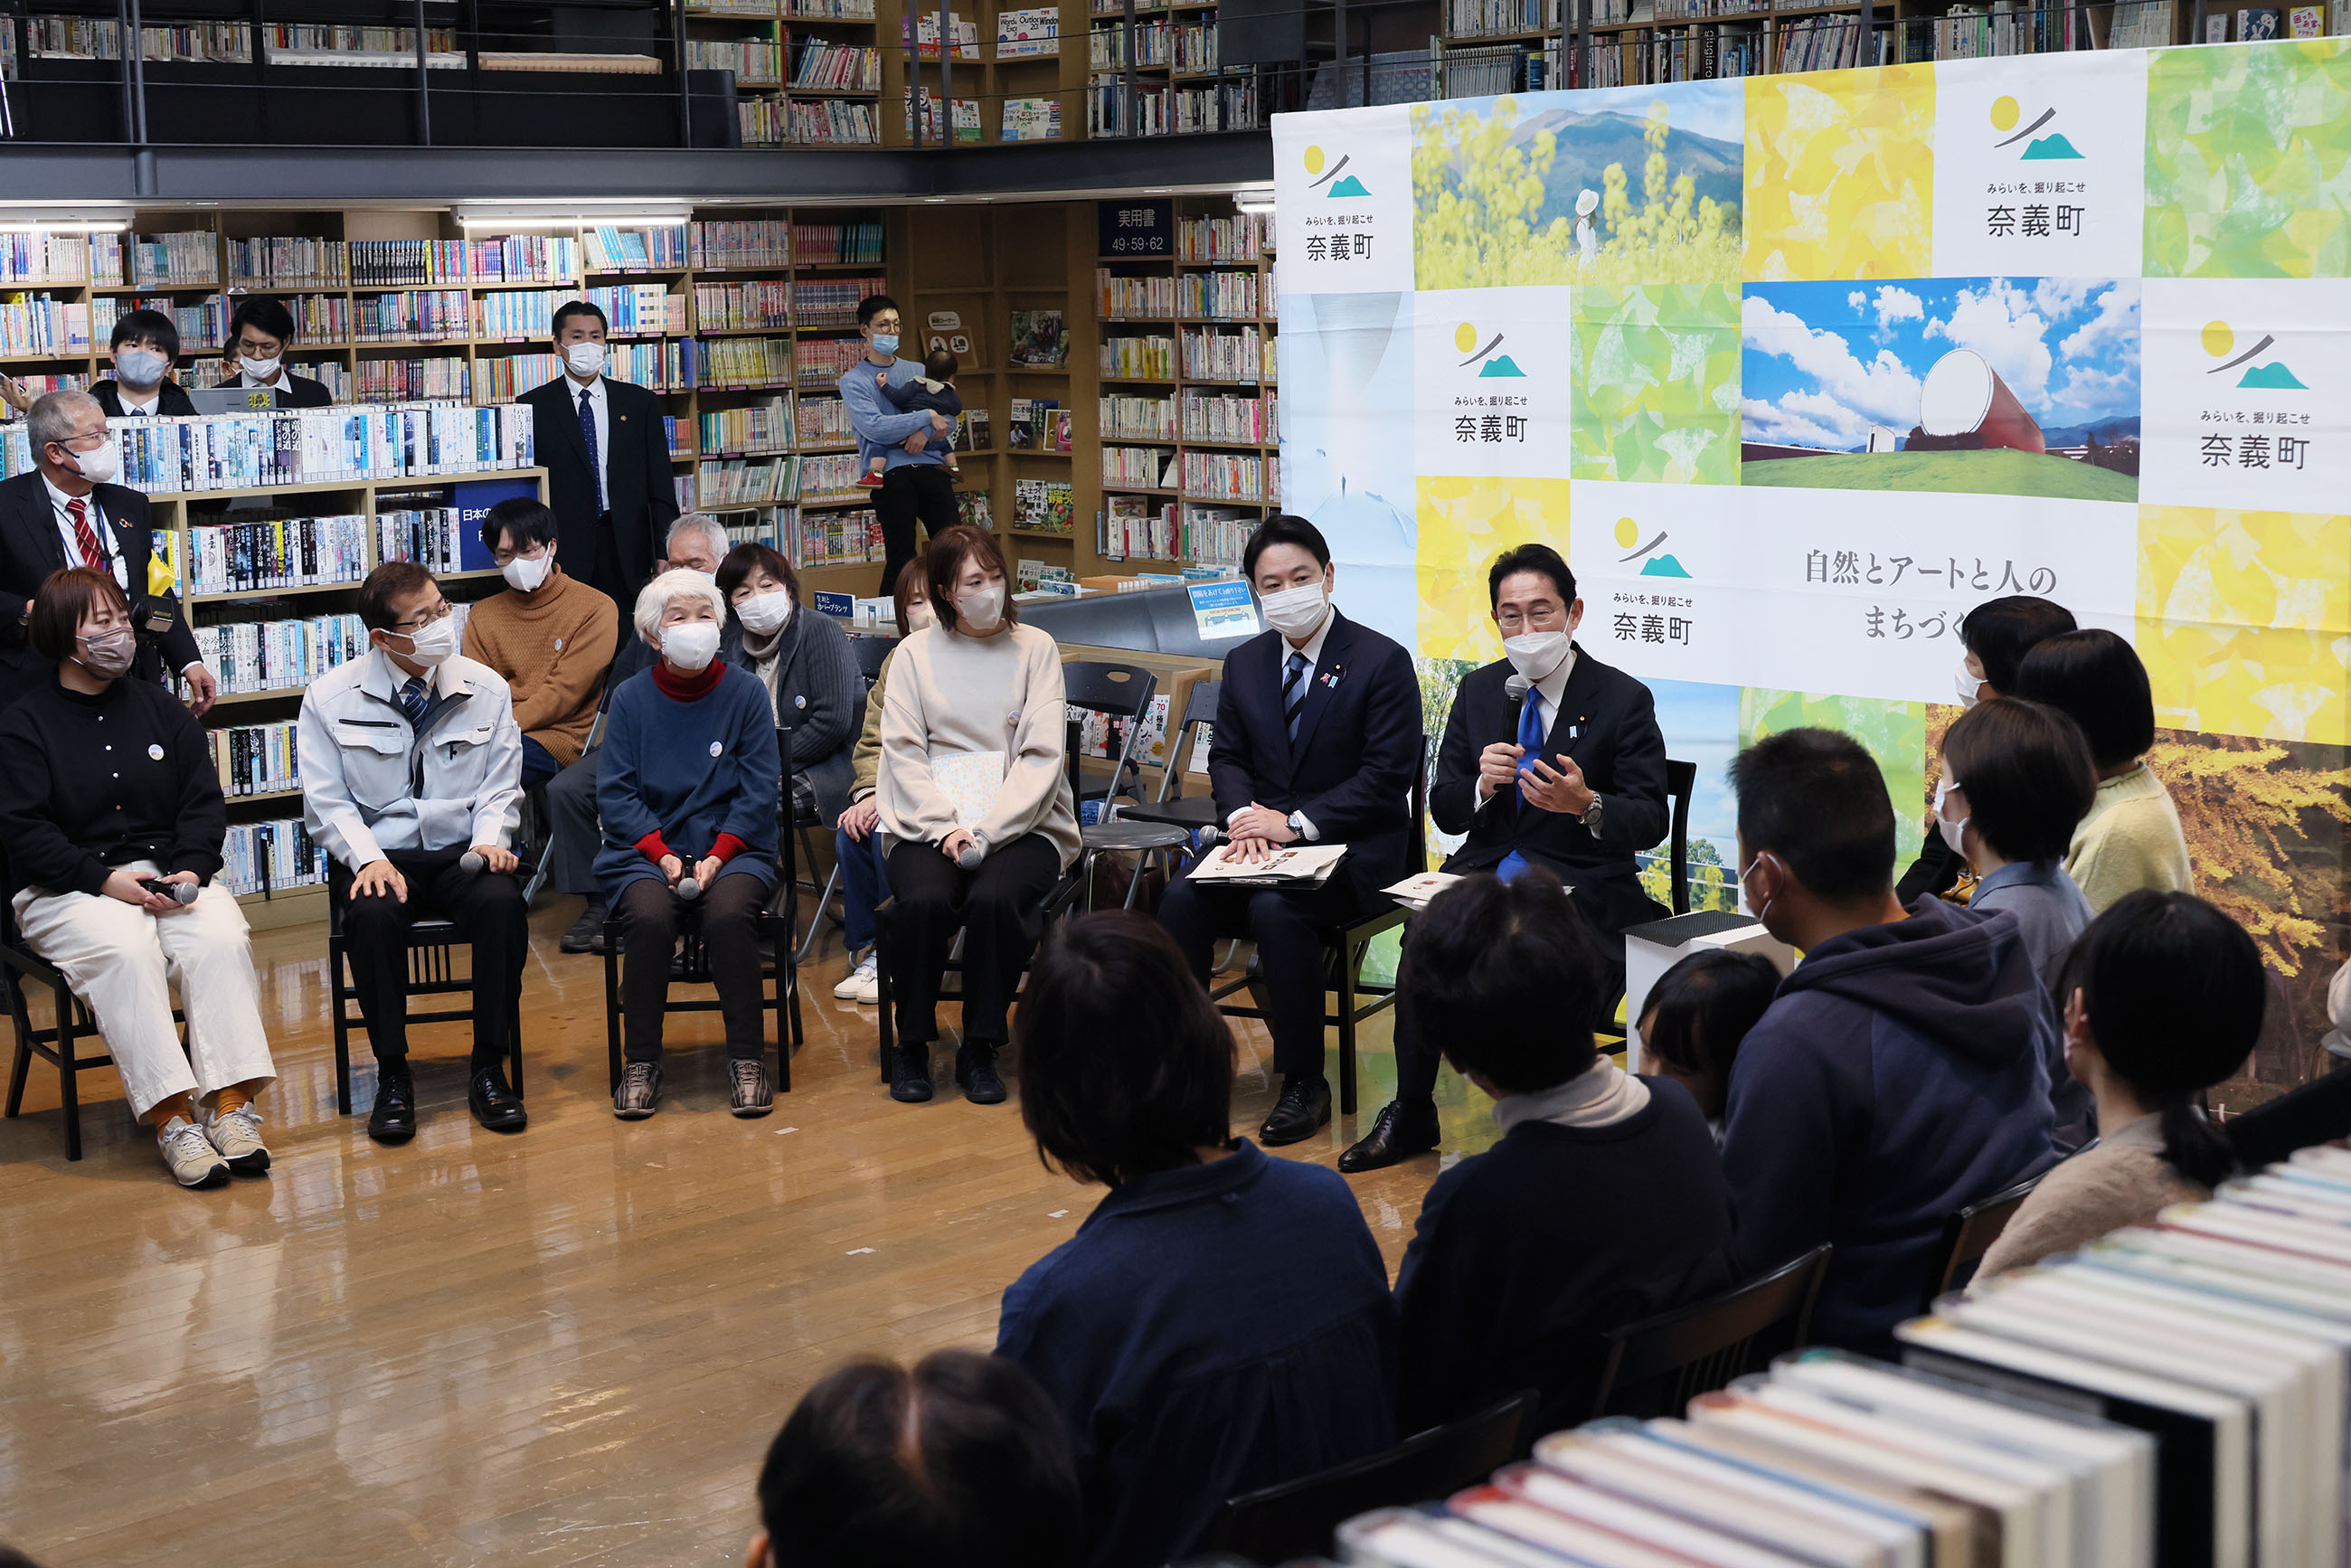 Prime Minster Kishida talking with participants in a public dialogue on policies related to children (5)